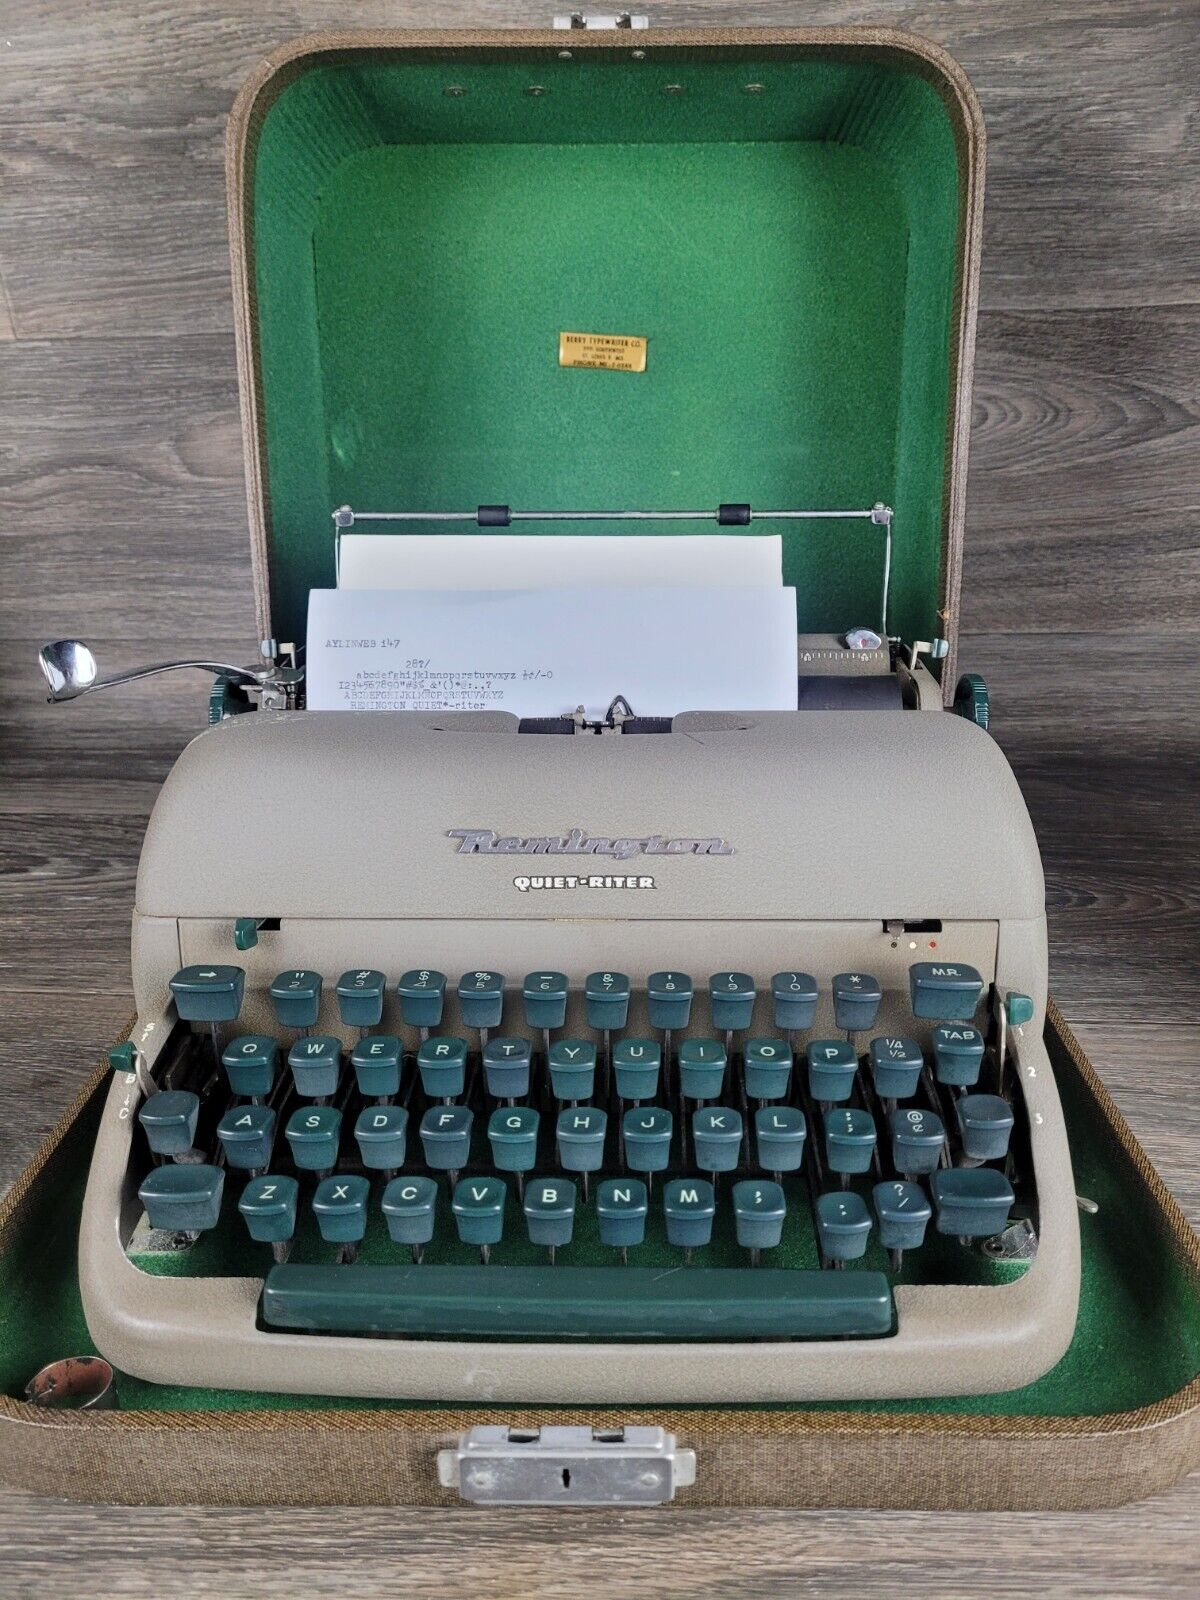 Vtg 1950's Remington Rand Quiet-Riter Manual Type Writer With Case. Works Great